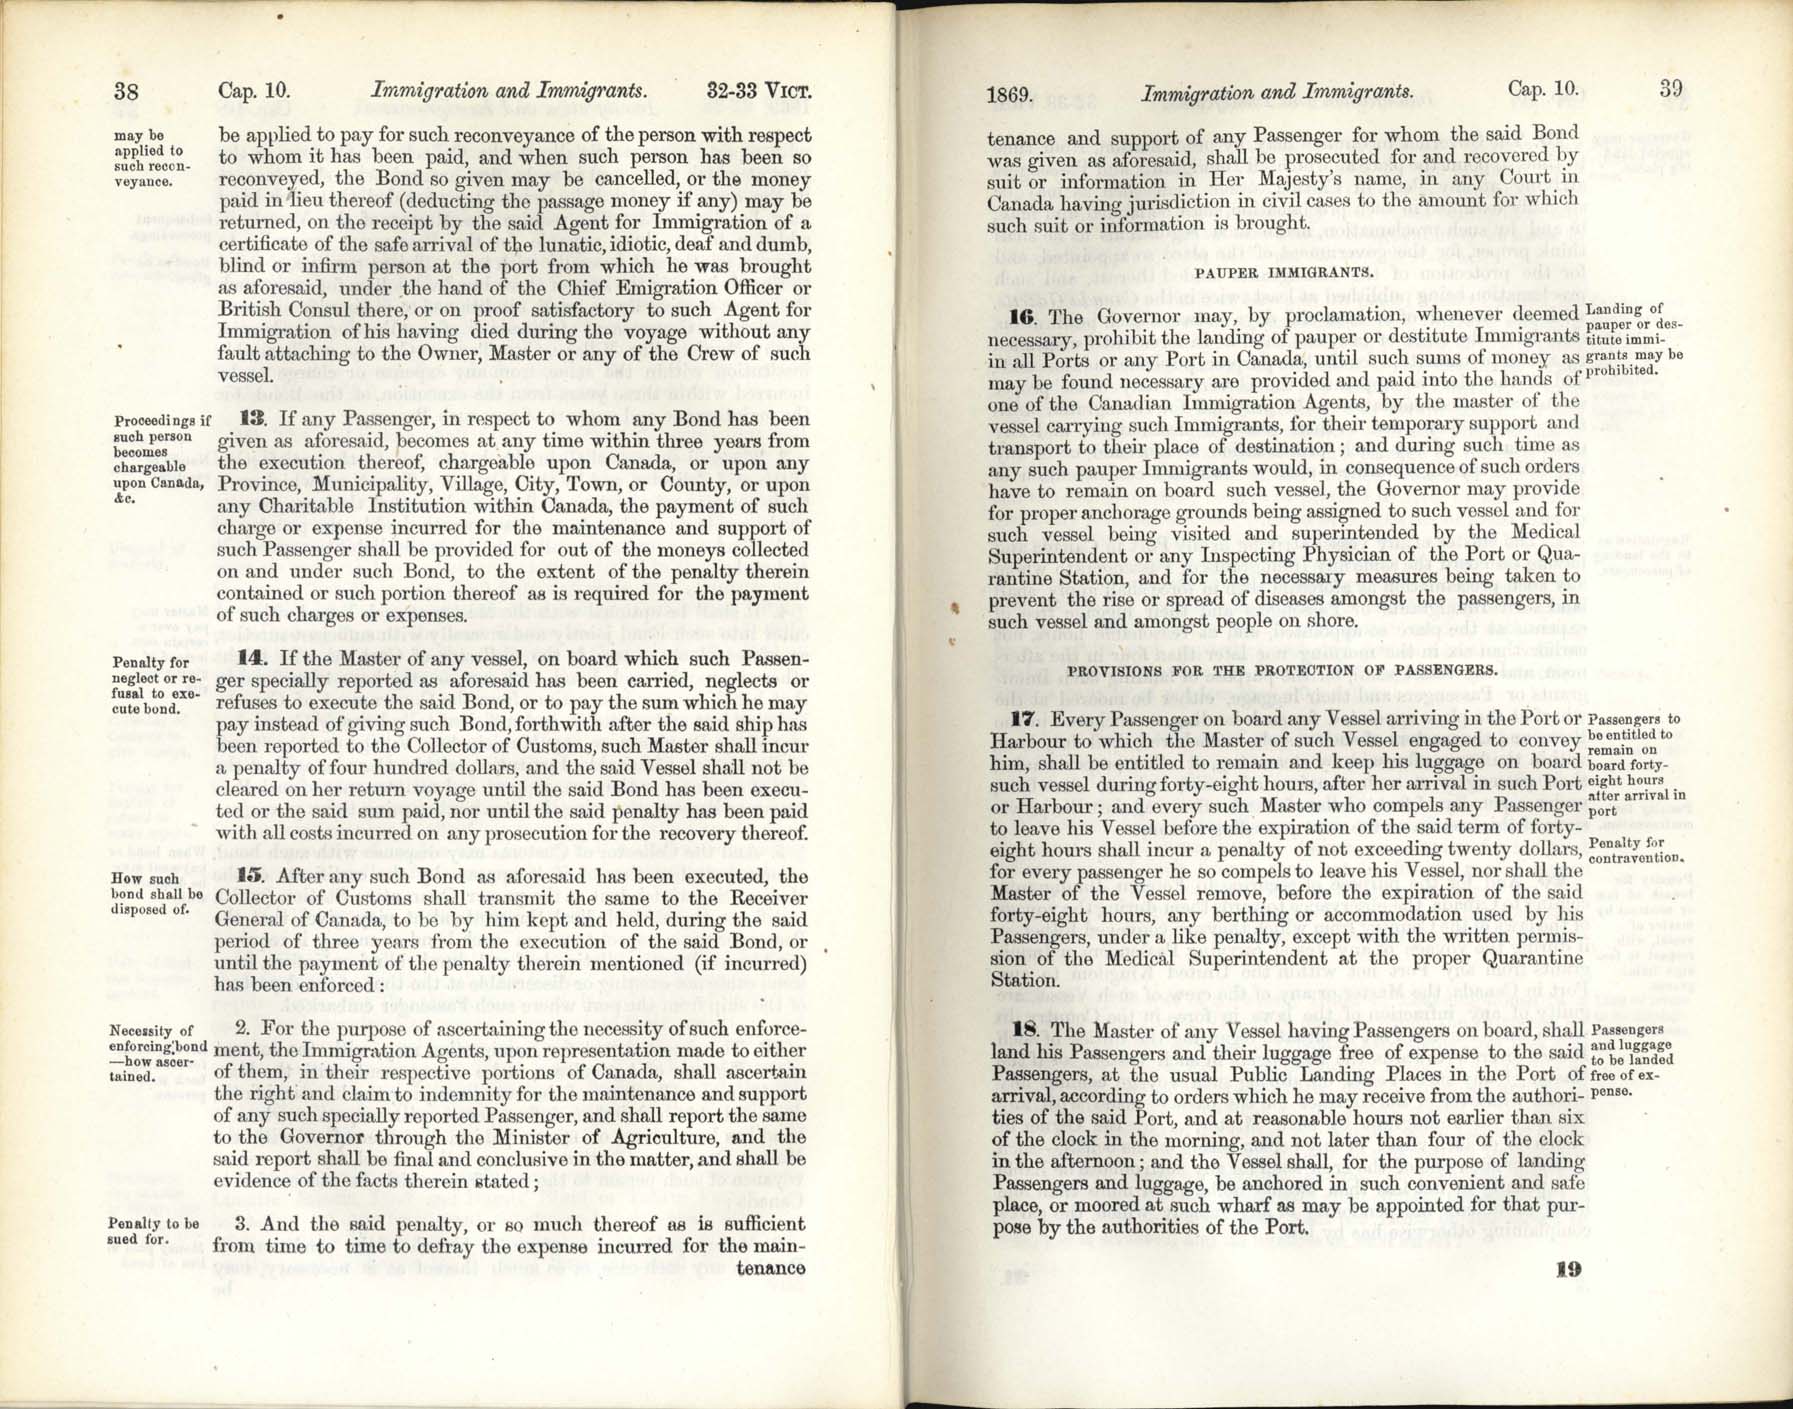 Page 38, 39 Immigration Act, 1869